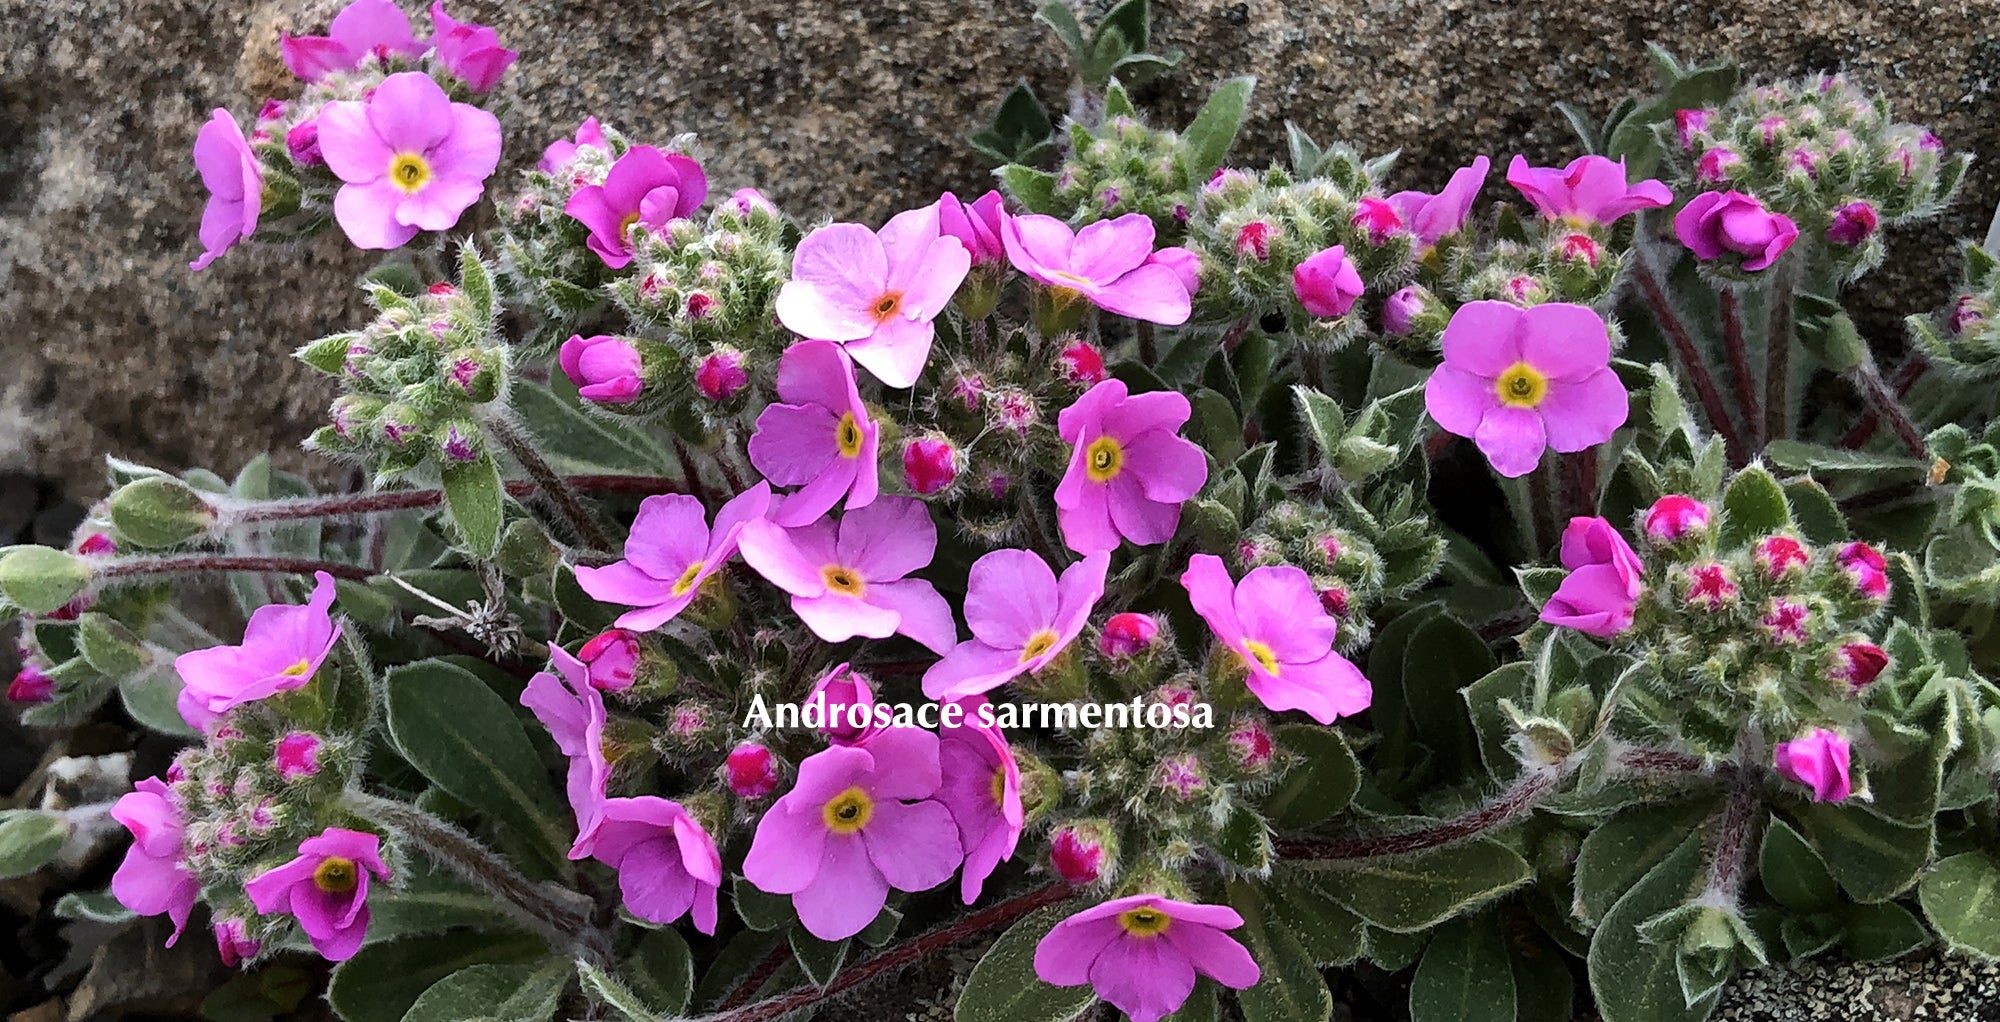 Magenta flowers of Androsace sarmentosa growing in the crevice garden